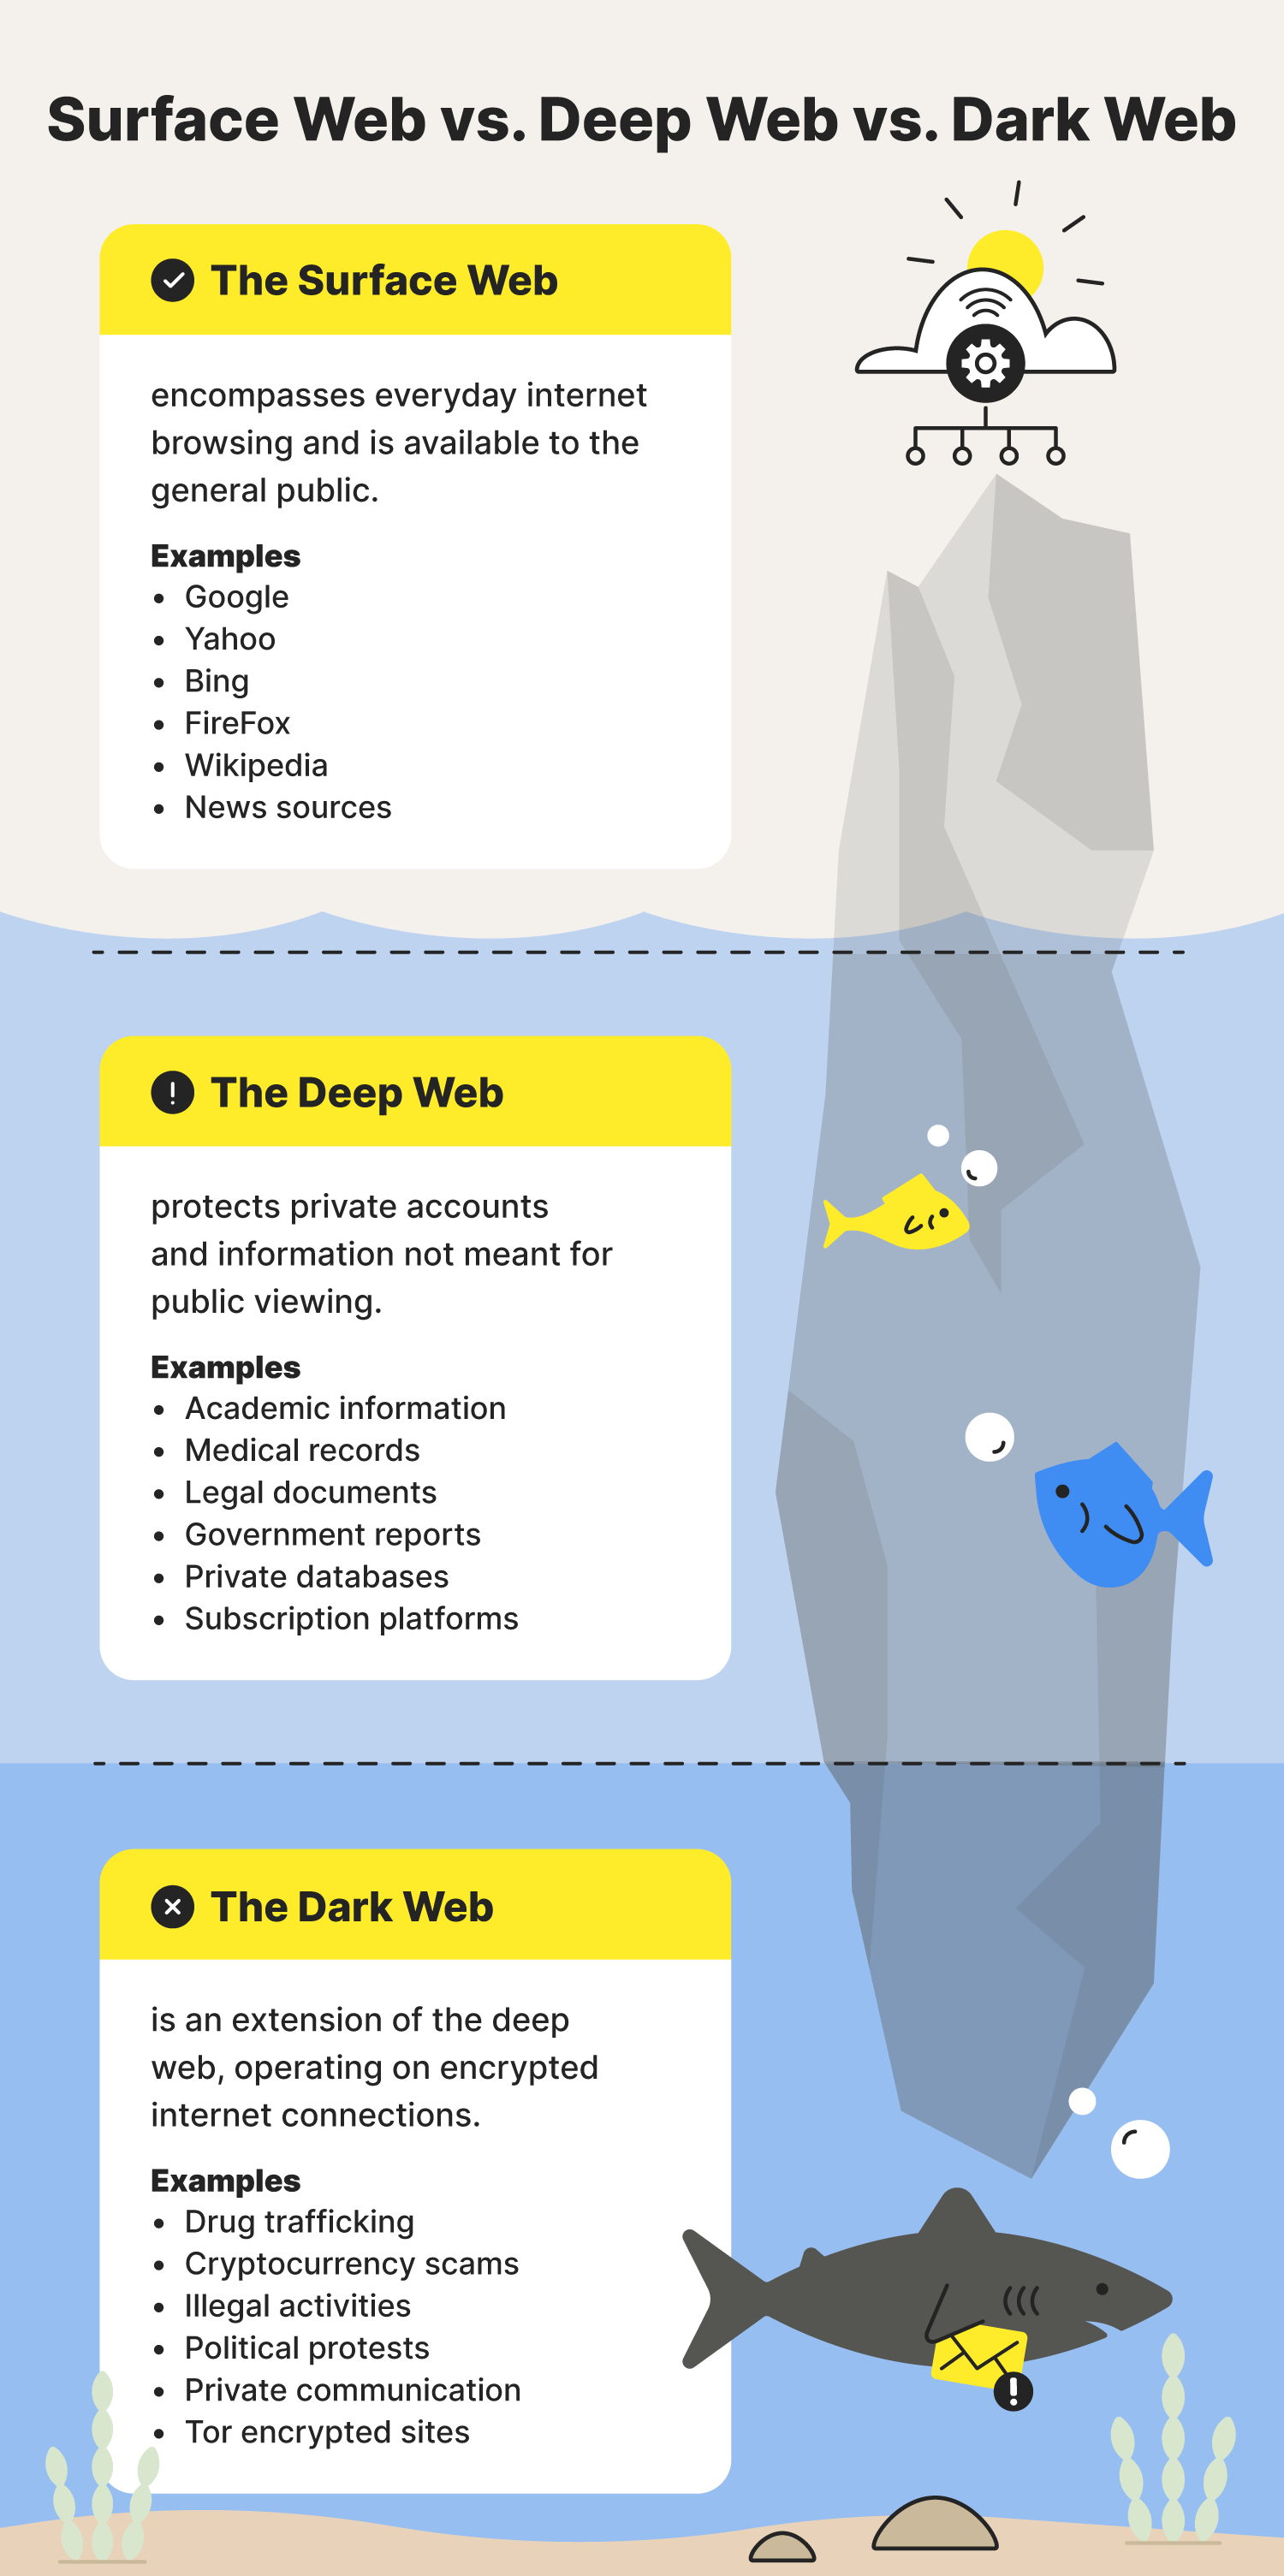 An illustration breaks down the main differences between the surface web vs deep web vs dark web.  